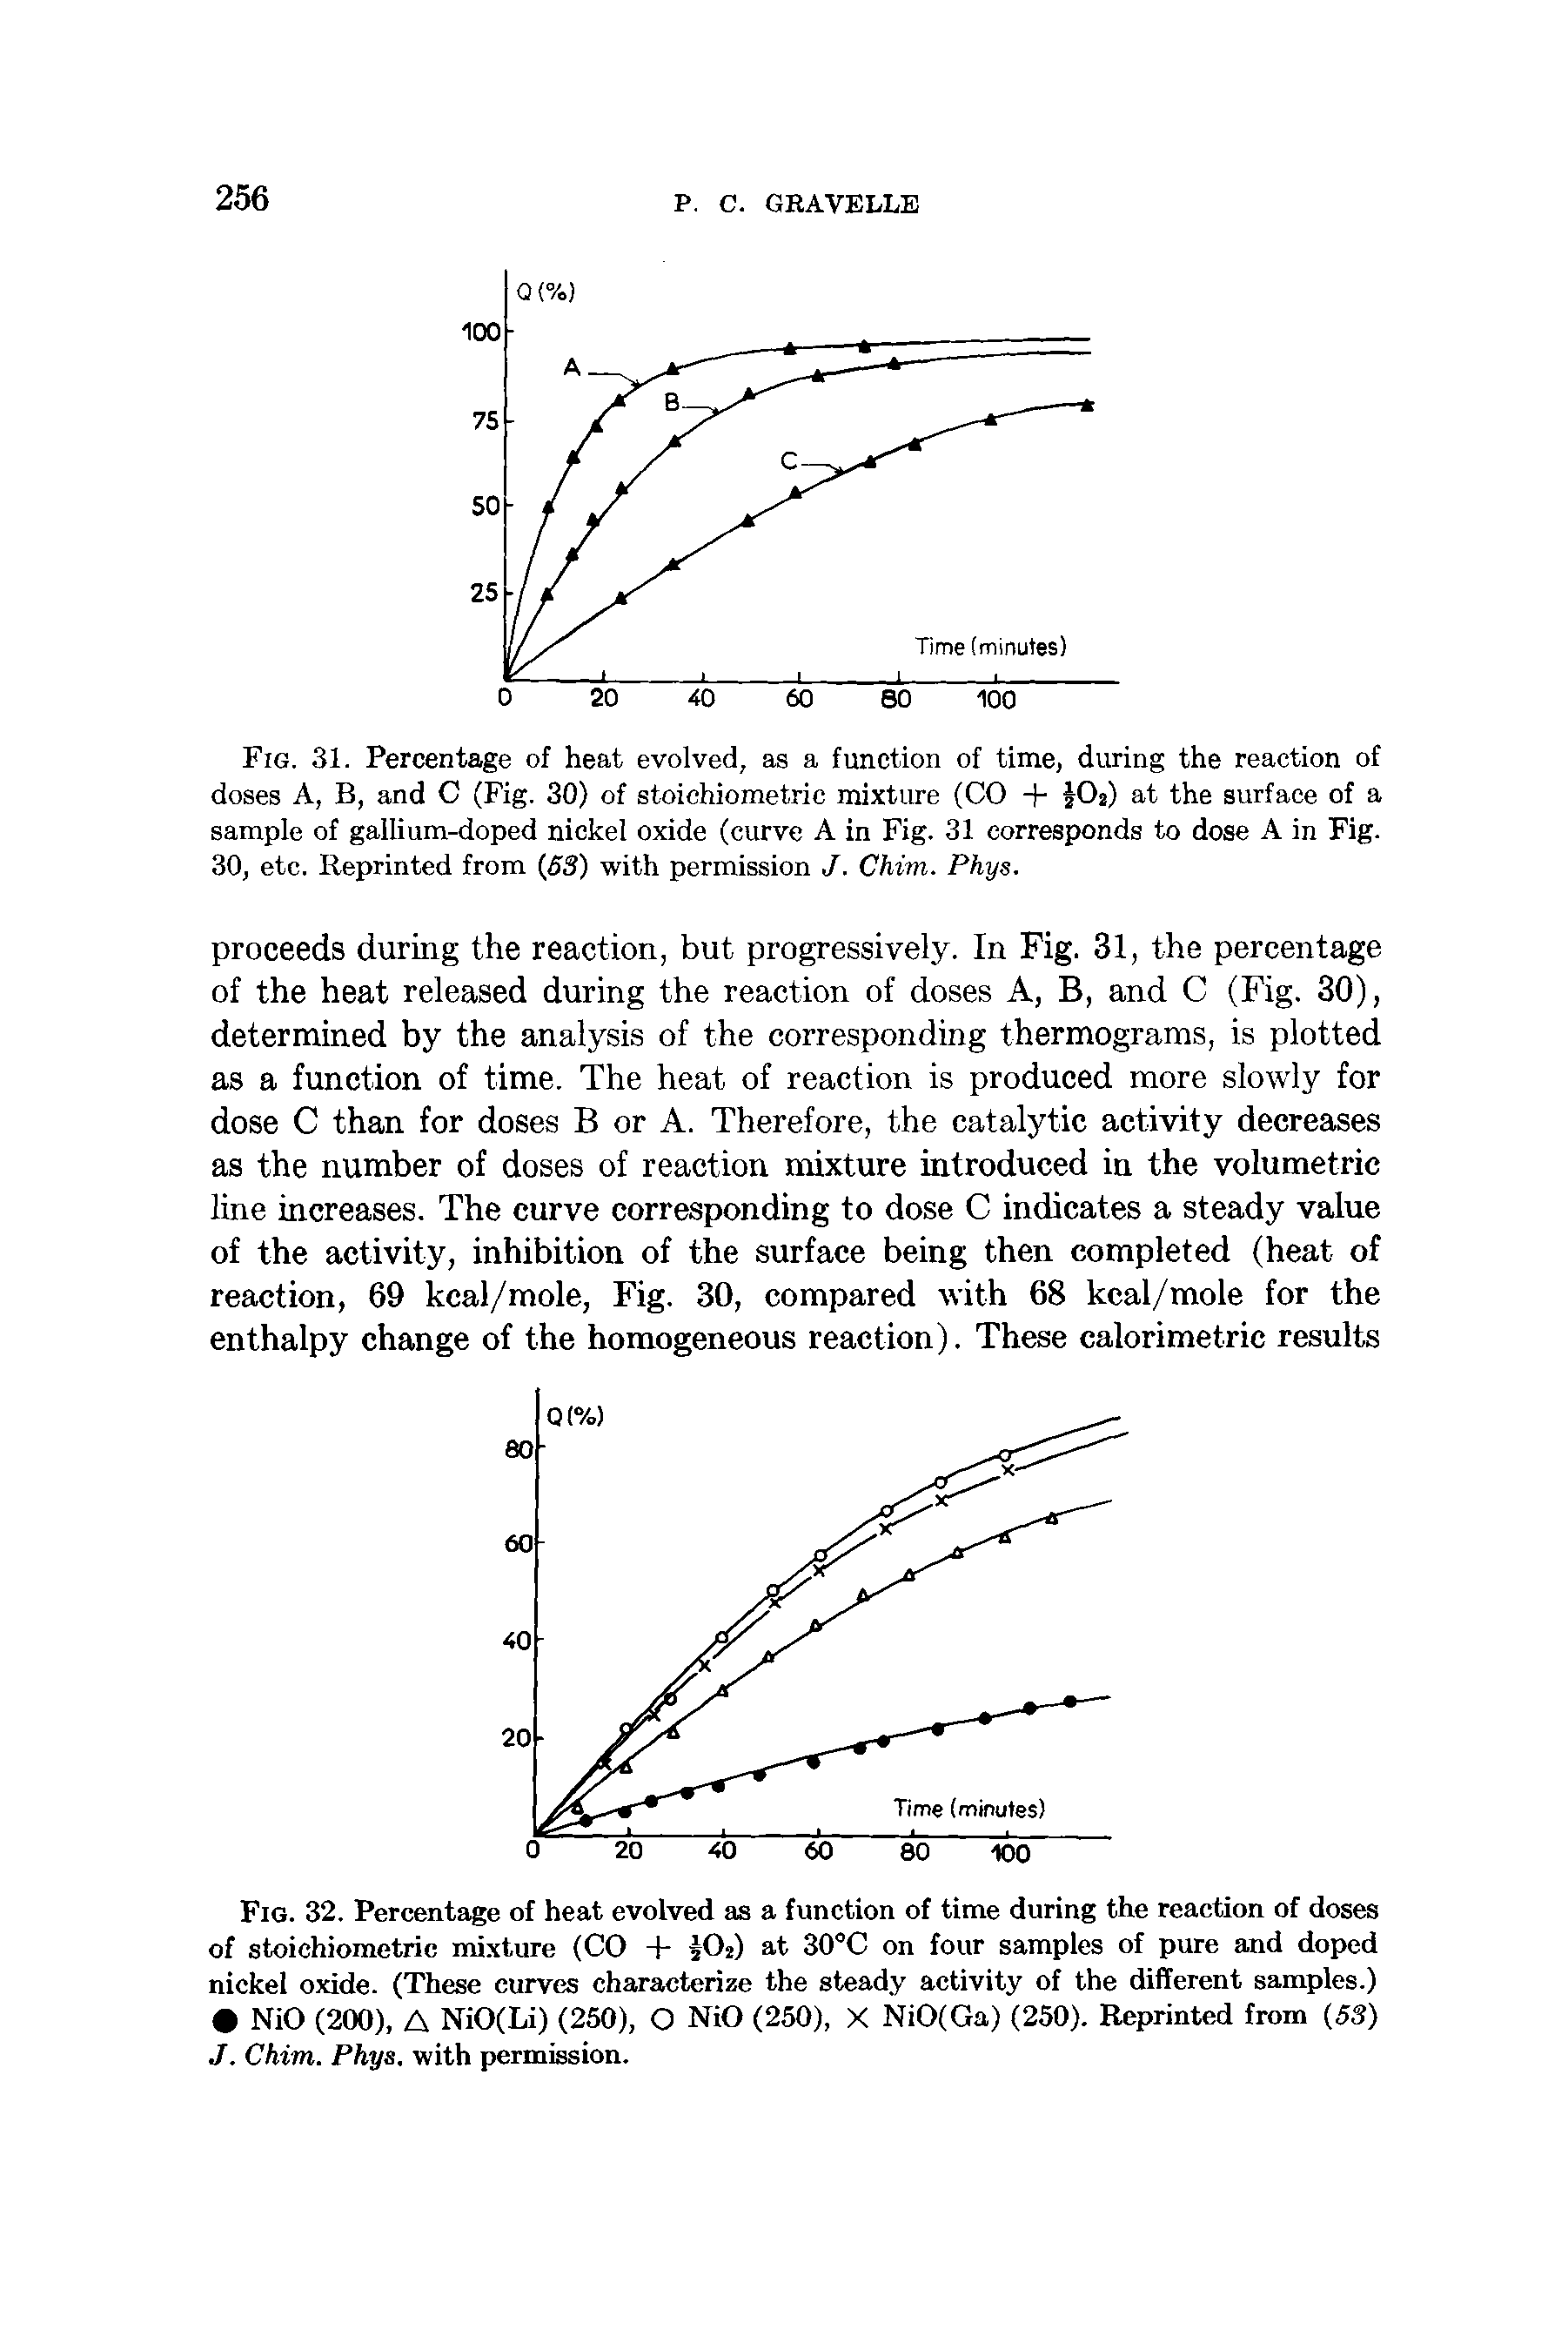 Fig. 32. Percentage of heat evolved as a function of time during the reaction of doses of stoichiometric mixture (CO + KM at 30°C on four samples of pure and doped nickel oxide. (These curves characterize the steady activity of the different samples.) NiO (200), A NiO(Li) (250), O NiO (250), X NiO(Ga) (250). Reprinted from (53) J. Chim. Phys. with permission.